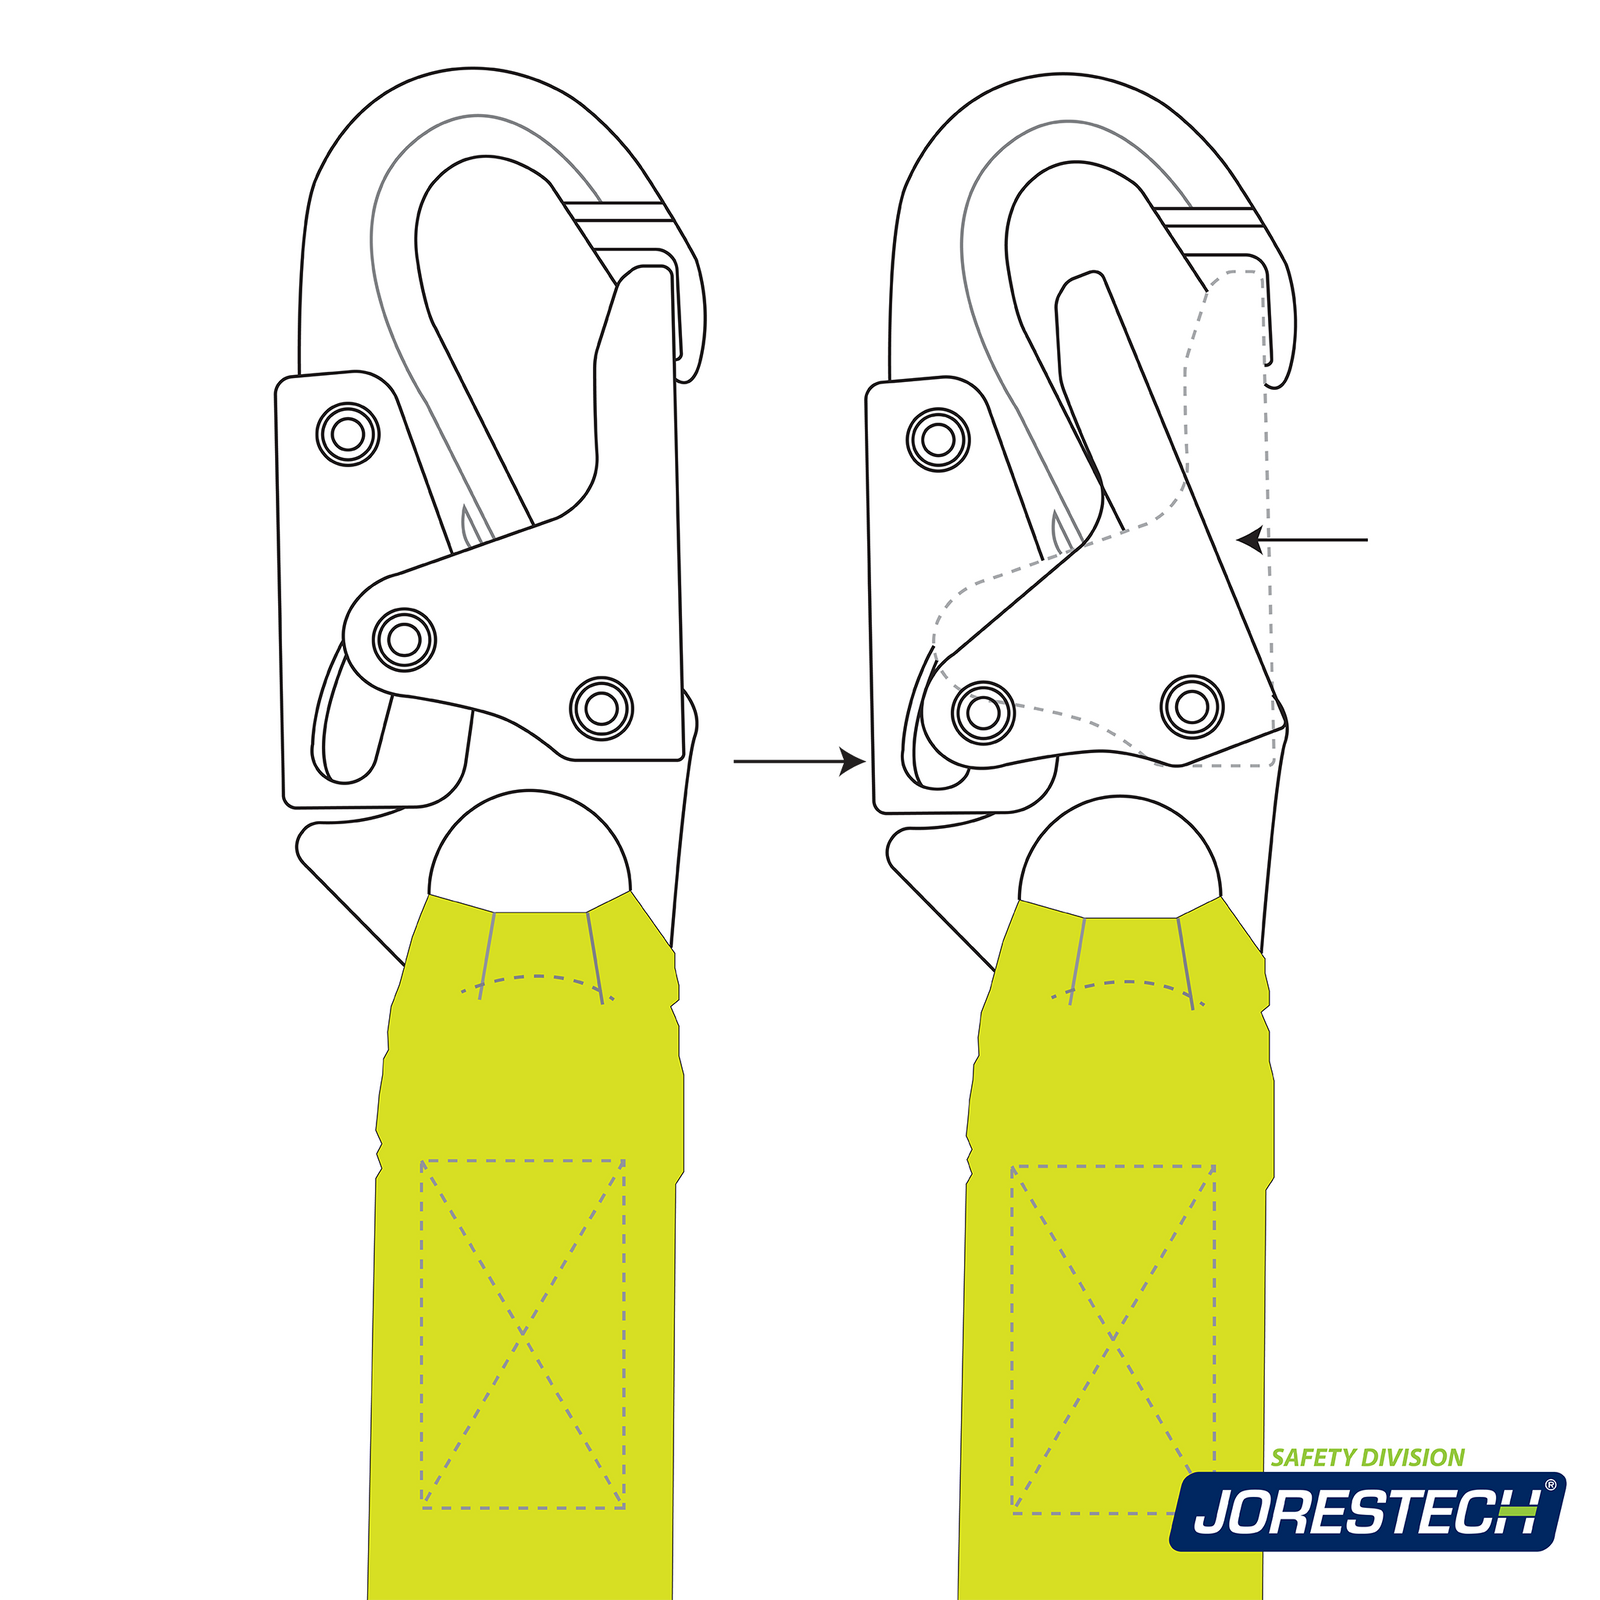 Diagram in black and yellow showing the metal shock absorbing snap hooks of the JORESTECH lanyard when open and when closed